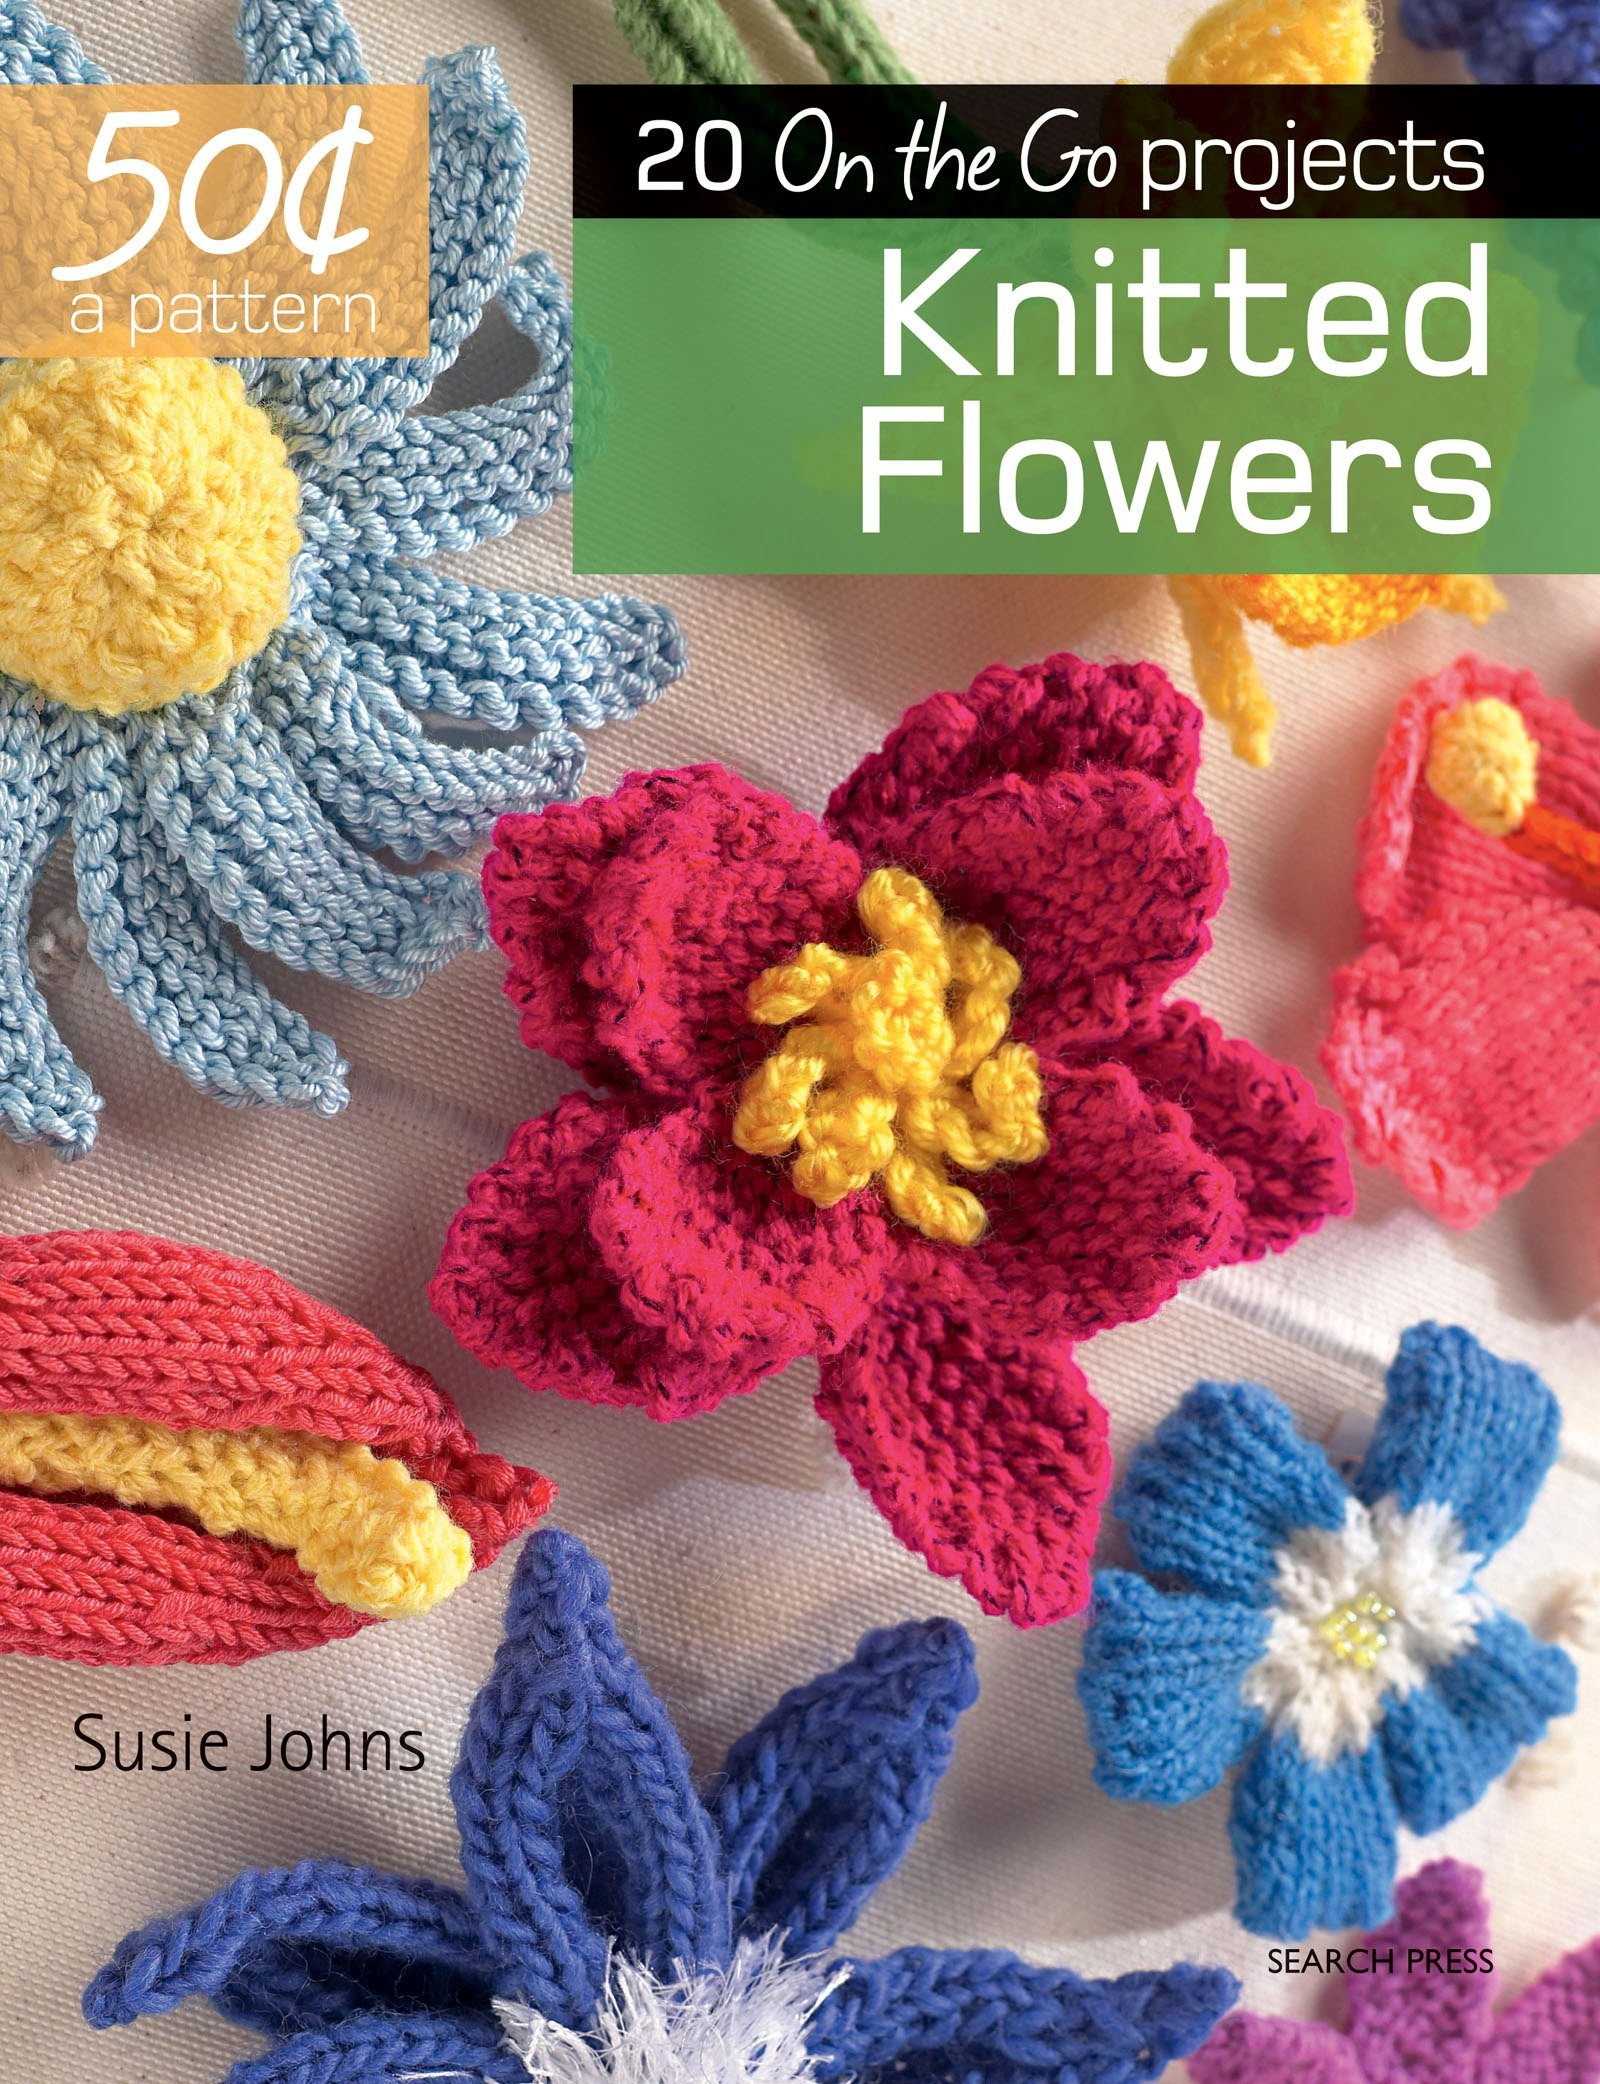 Knitted Flower Patterns Free 50 Cents A Pattern Knitted Flowers 20 On The Go Projects